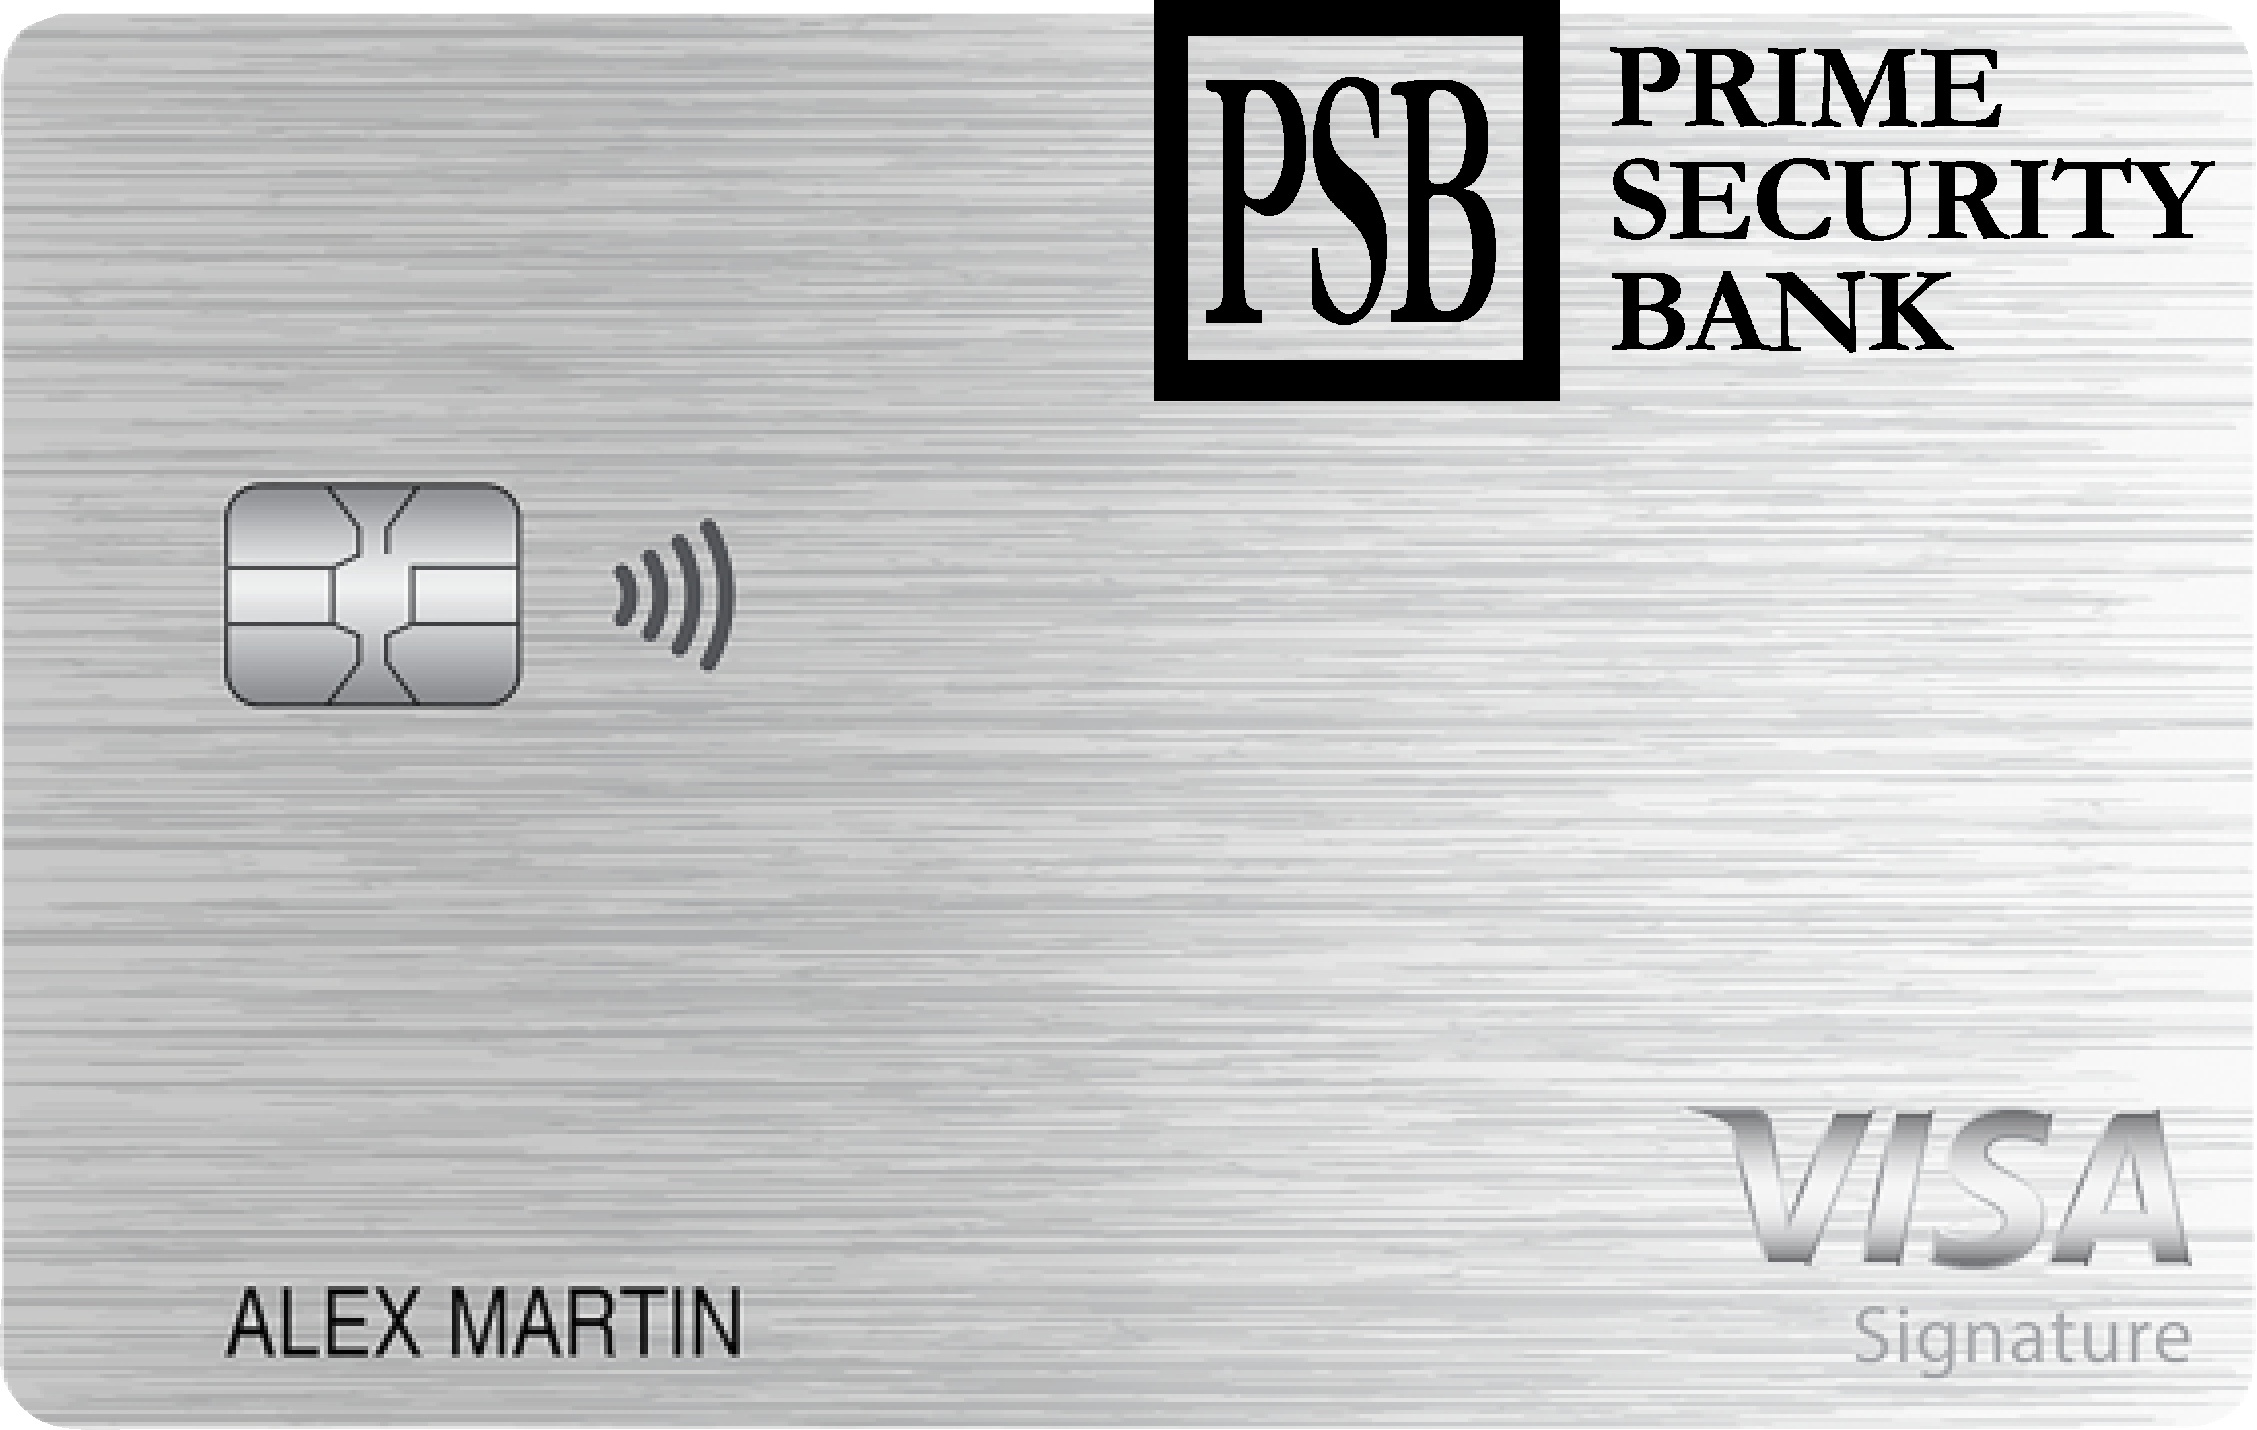 PRIME SECURITY BANK